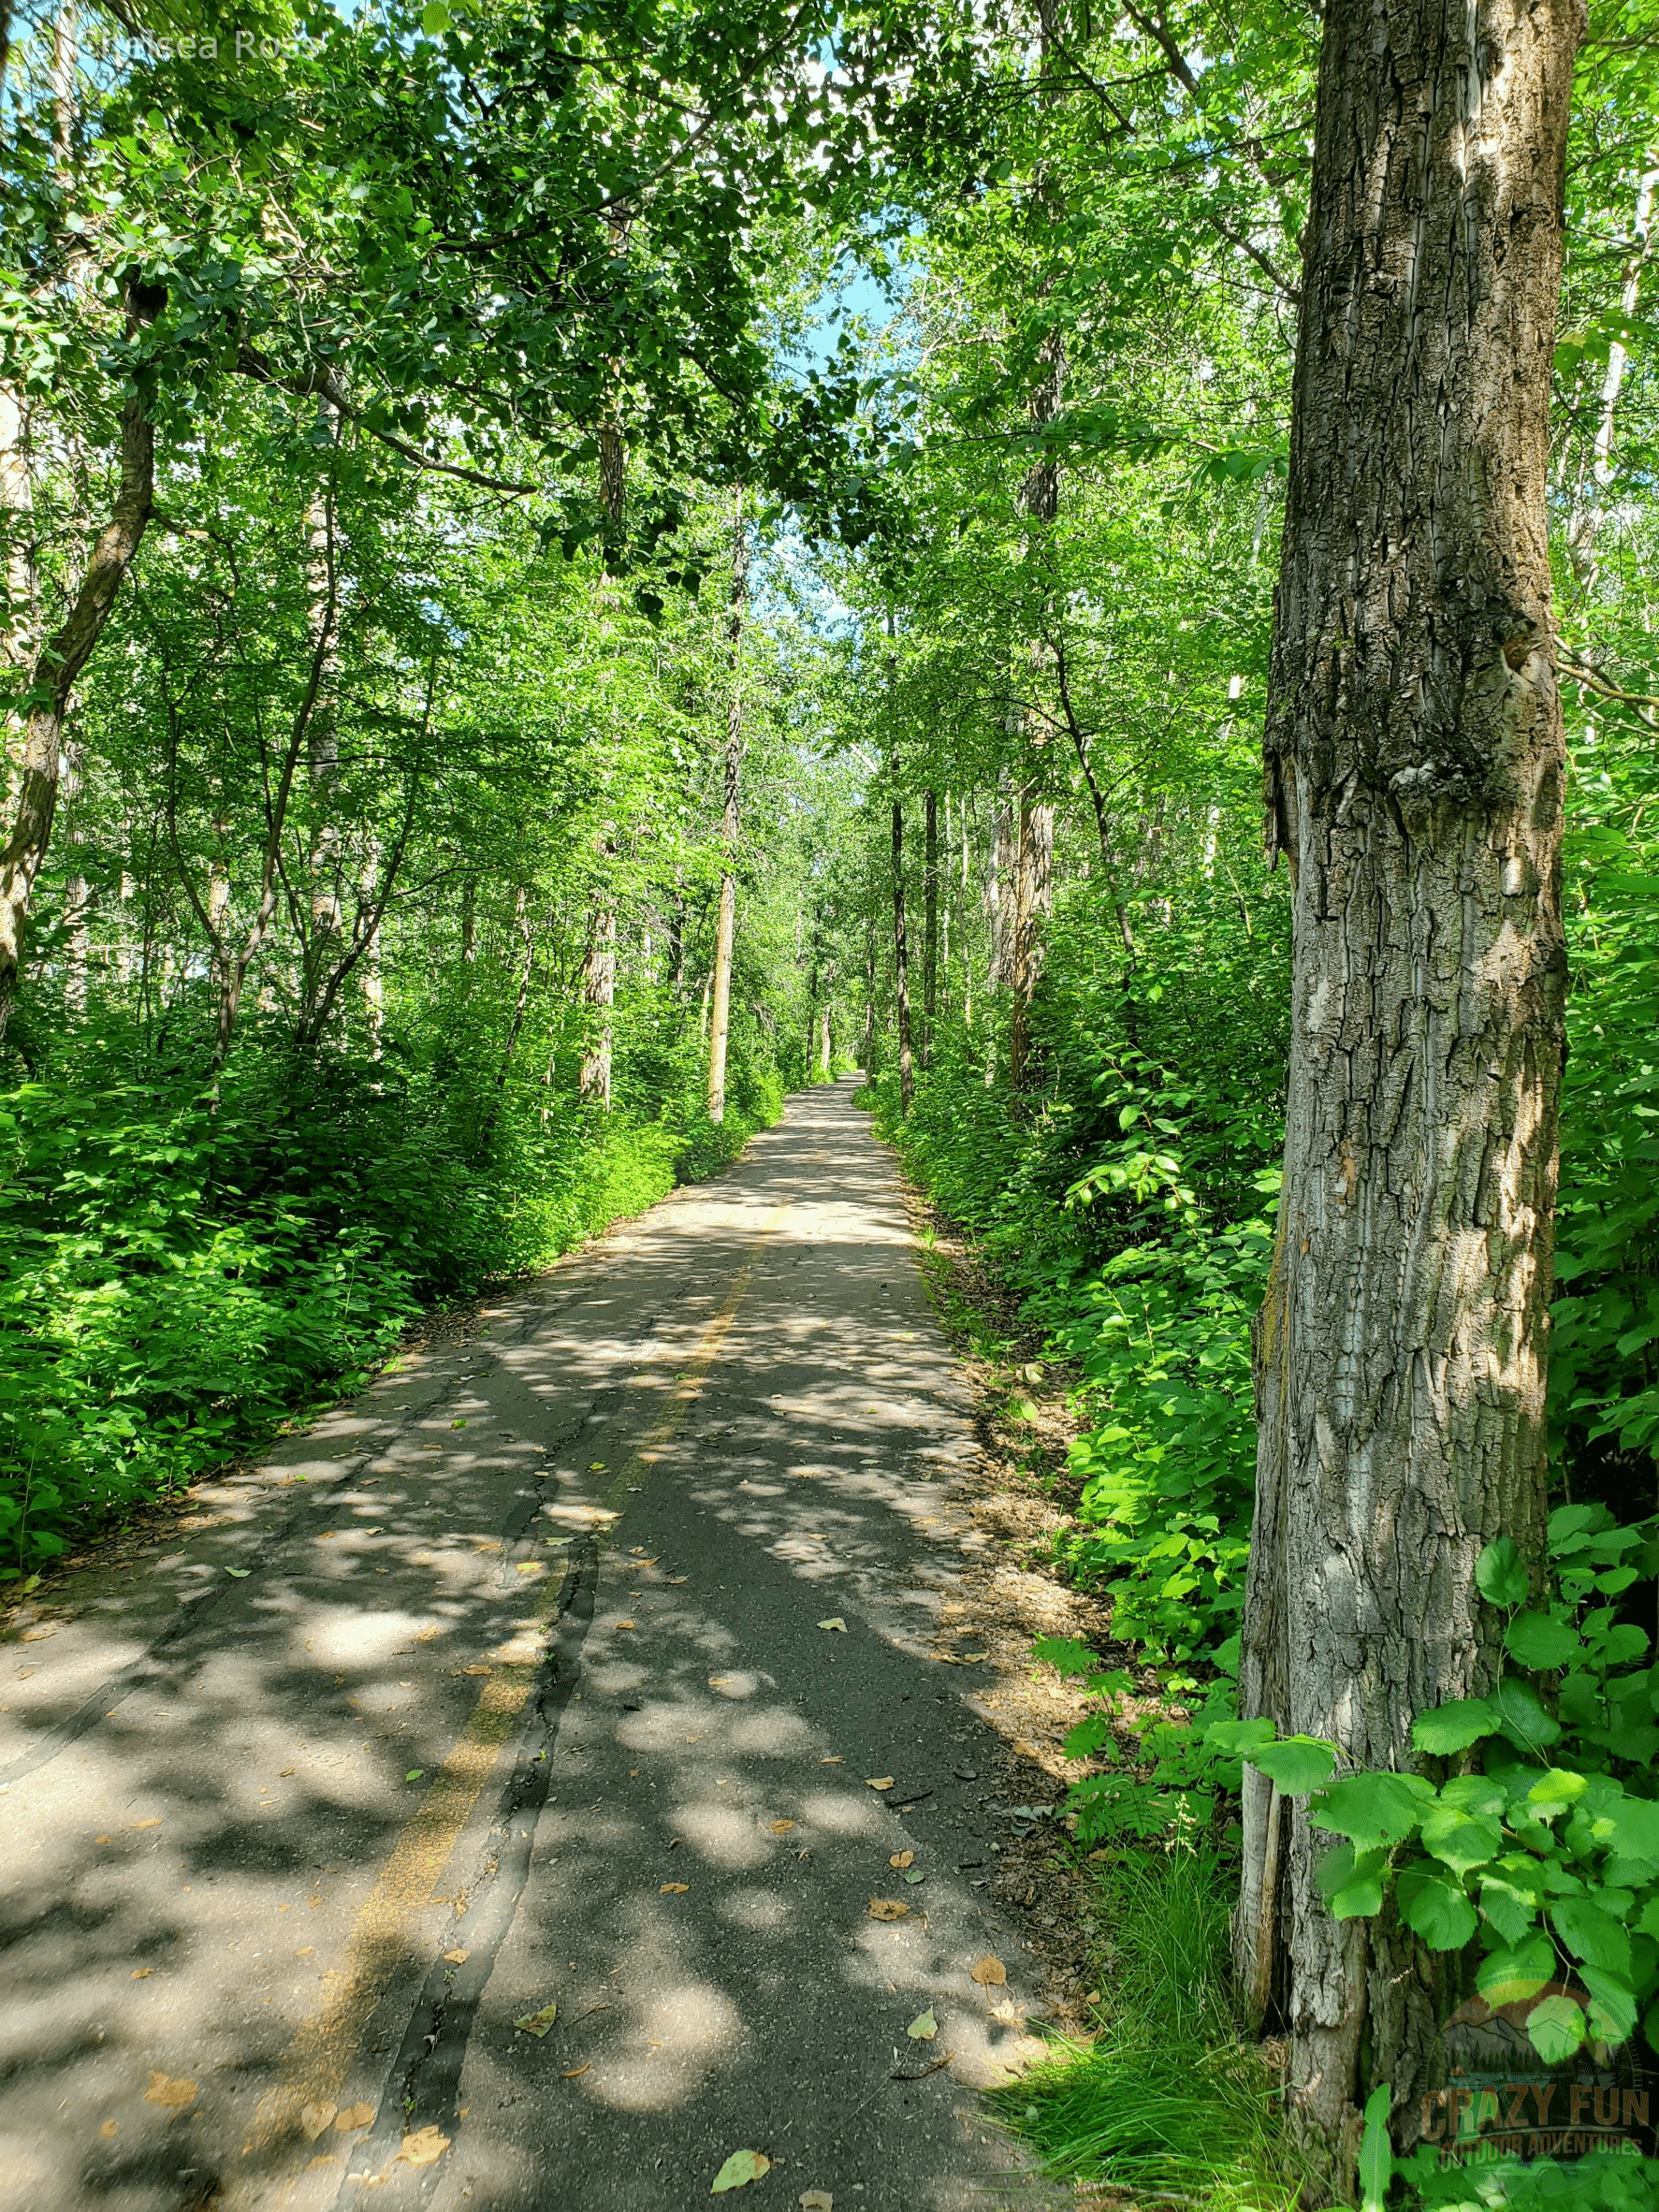 Edmonton Day Trips: a path in the shade surrounded by green trees.